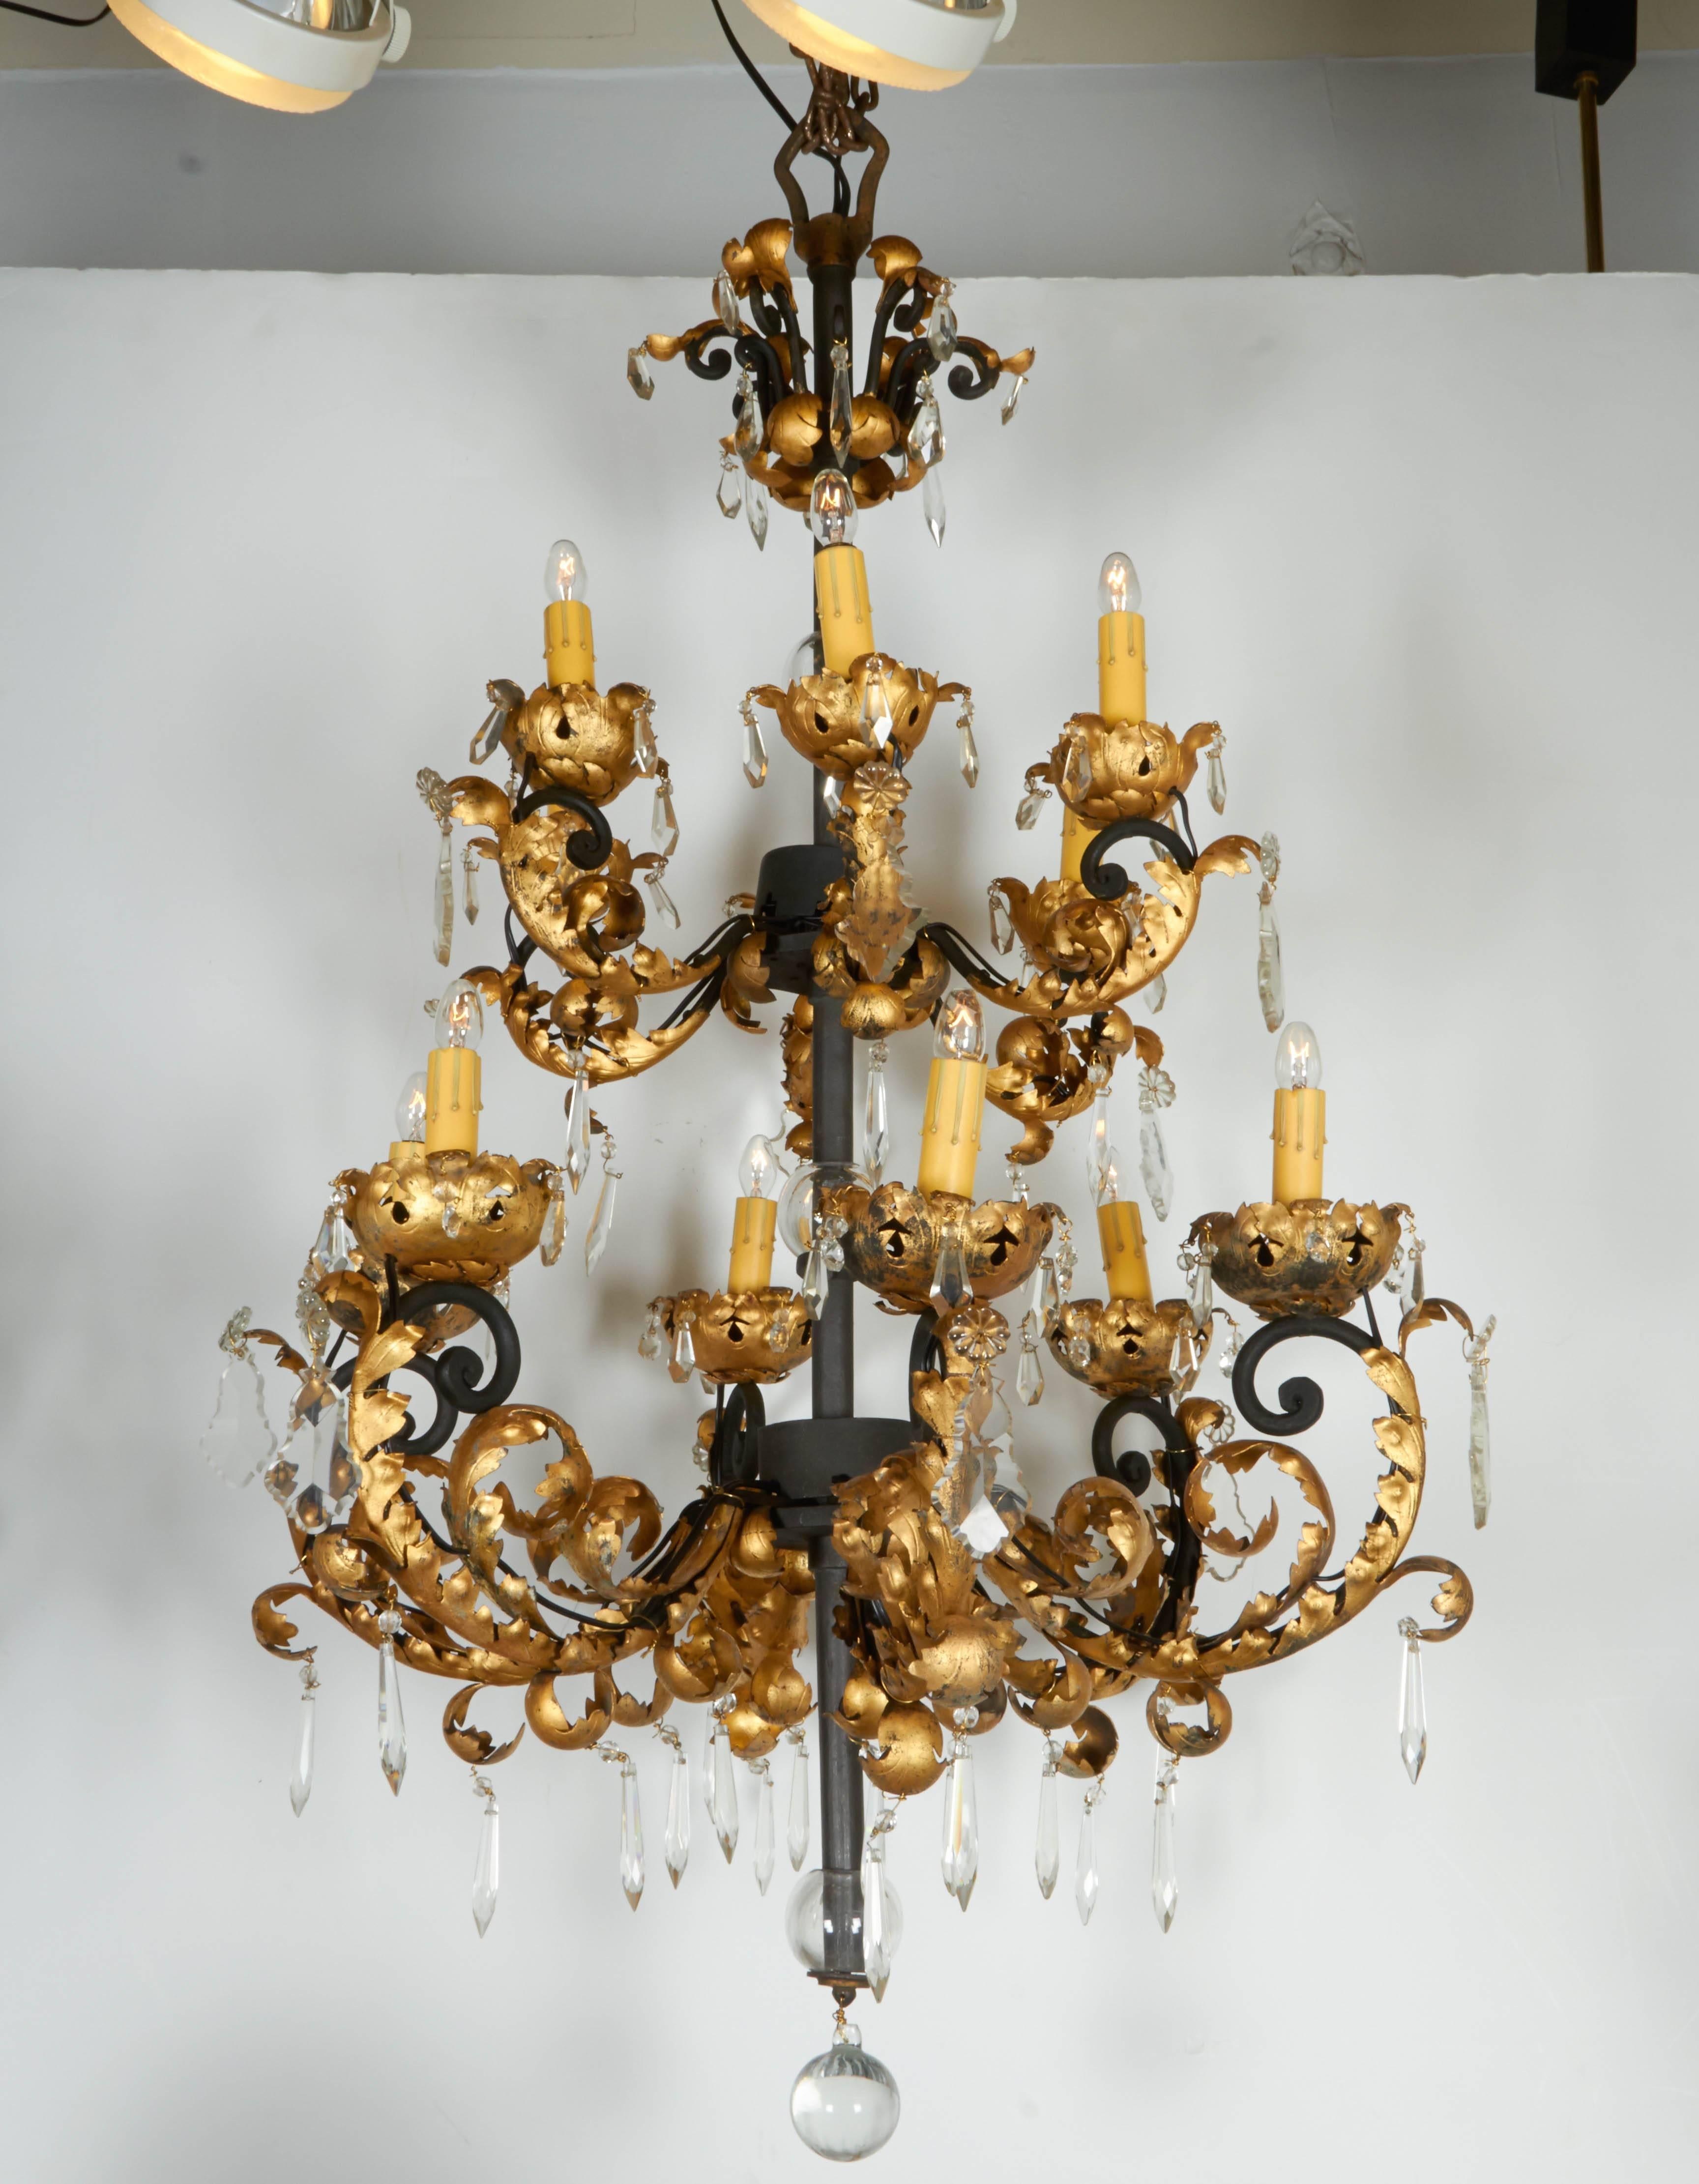 A dramatic pair of Baroque style Hollywood Regency black satin enamel and gilt chandeliers with crystal accents, circa 1950, each chandeliers has 12 lights, pointed and flat cut crystals and ball pendant. Handwrought and gold leafed. Nearly